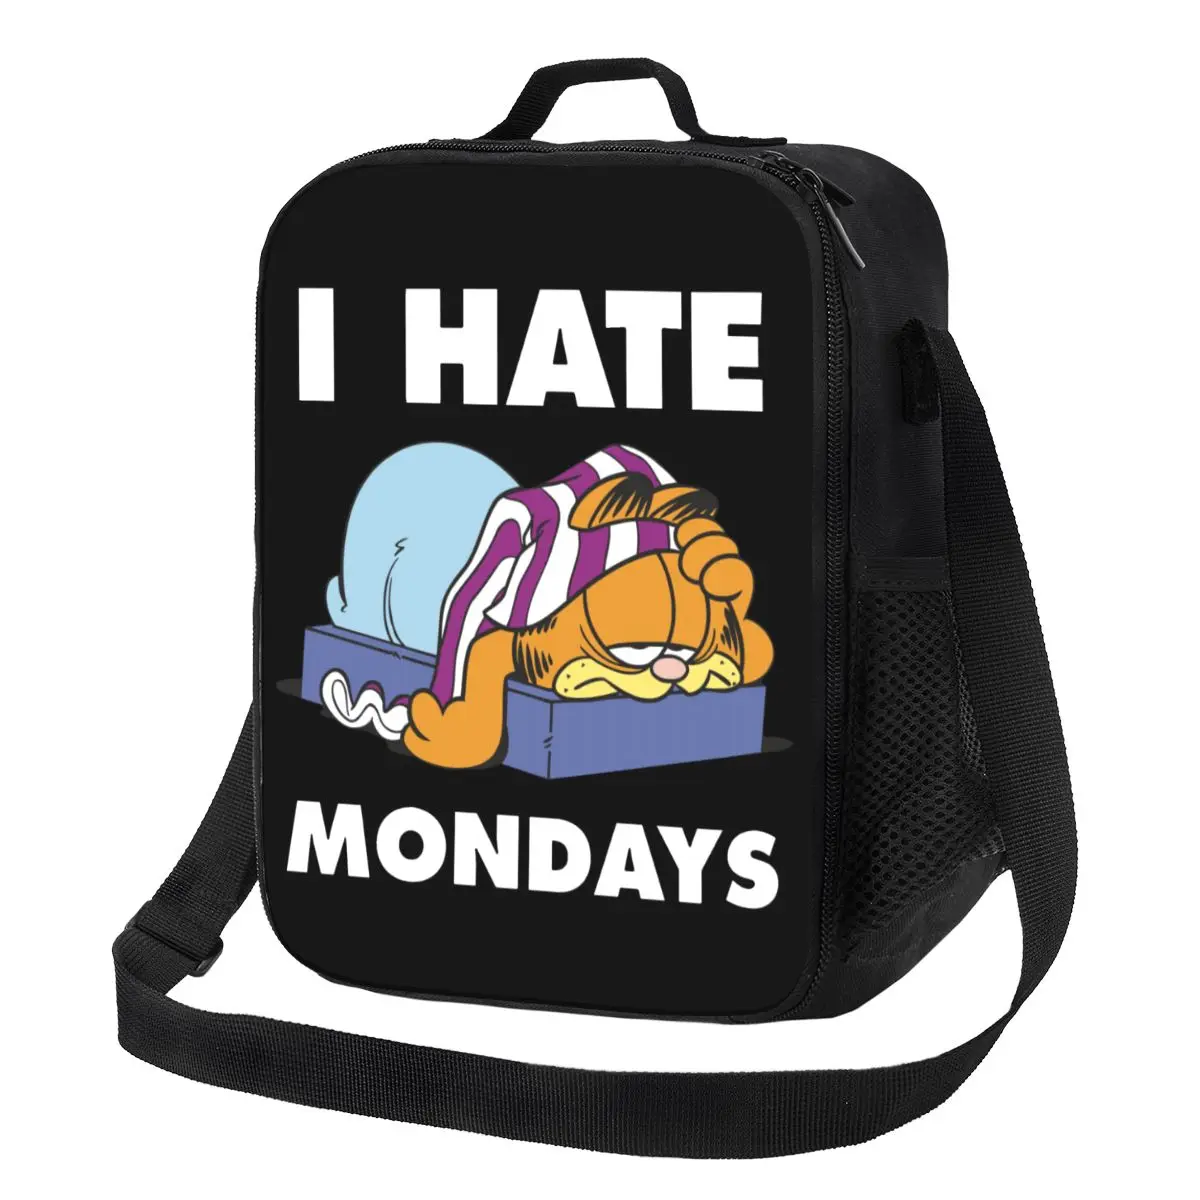 Garfields Insulated Lunch Bags for Women I hate Monday Portable Thermal Cooler Food Bento Box Kids